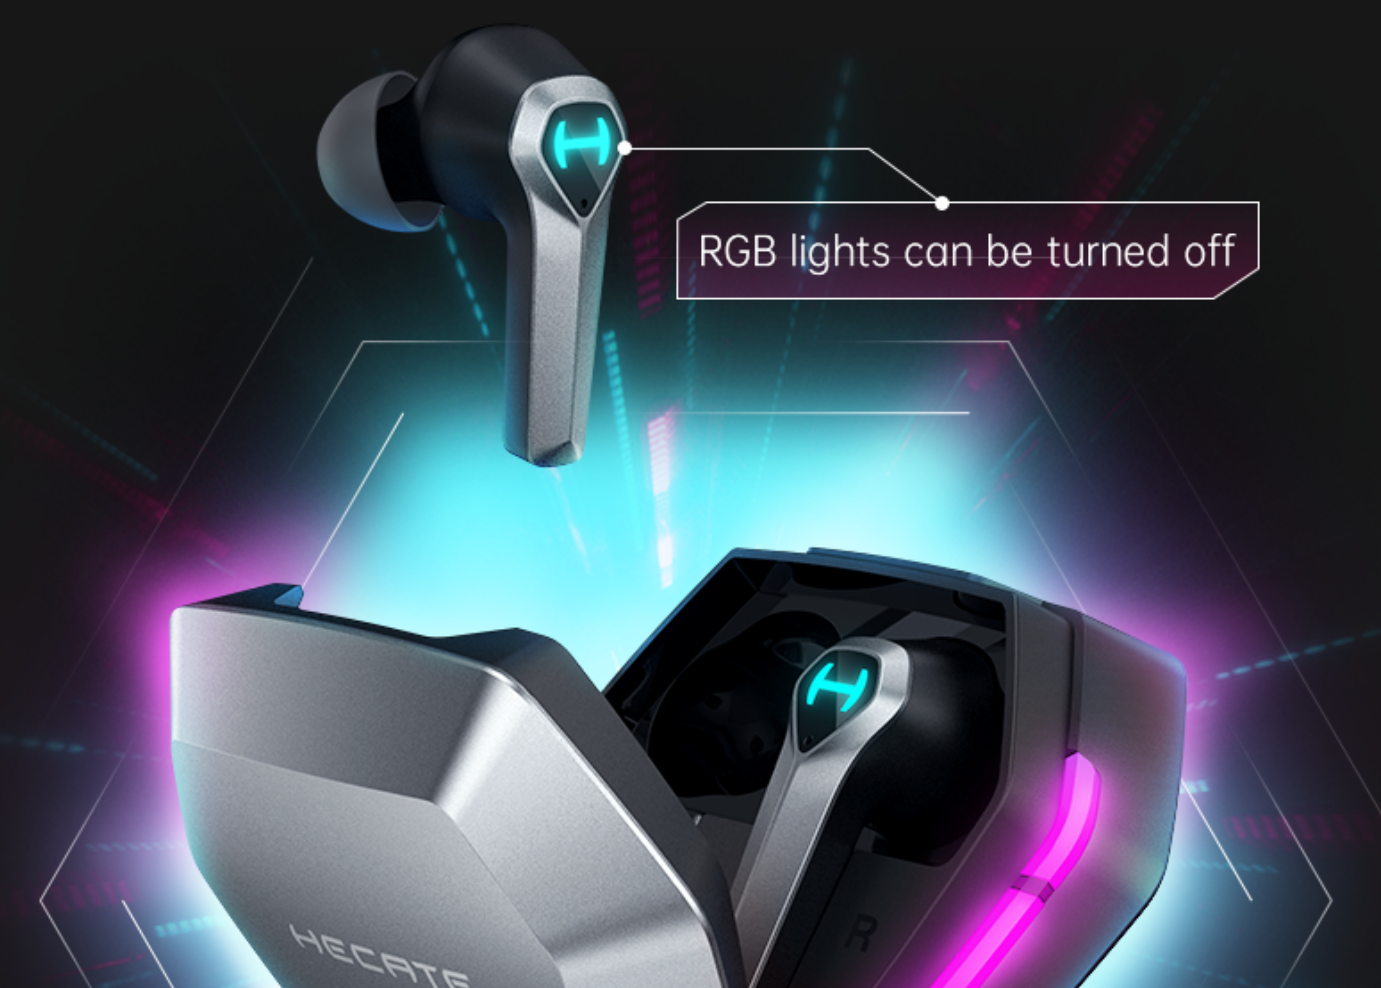 EDIFIER GX04 gaming headset, with font "RGB lights can be turned off" right